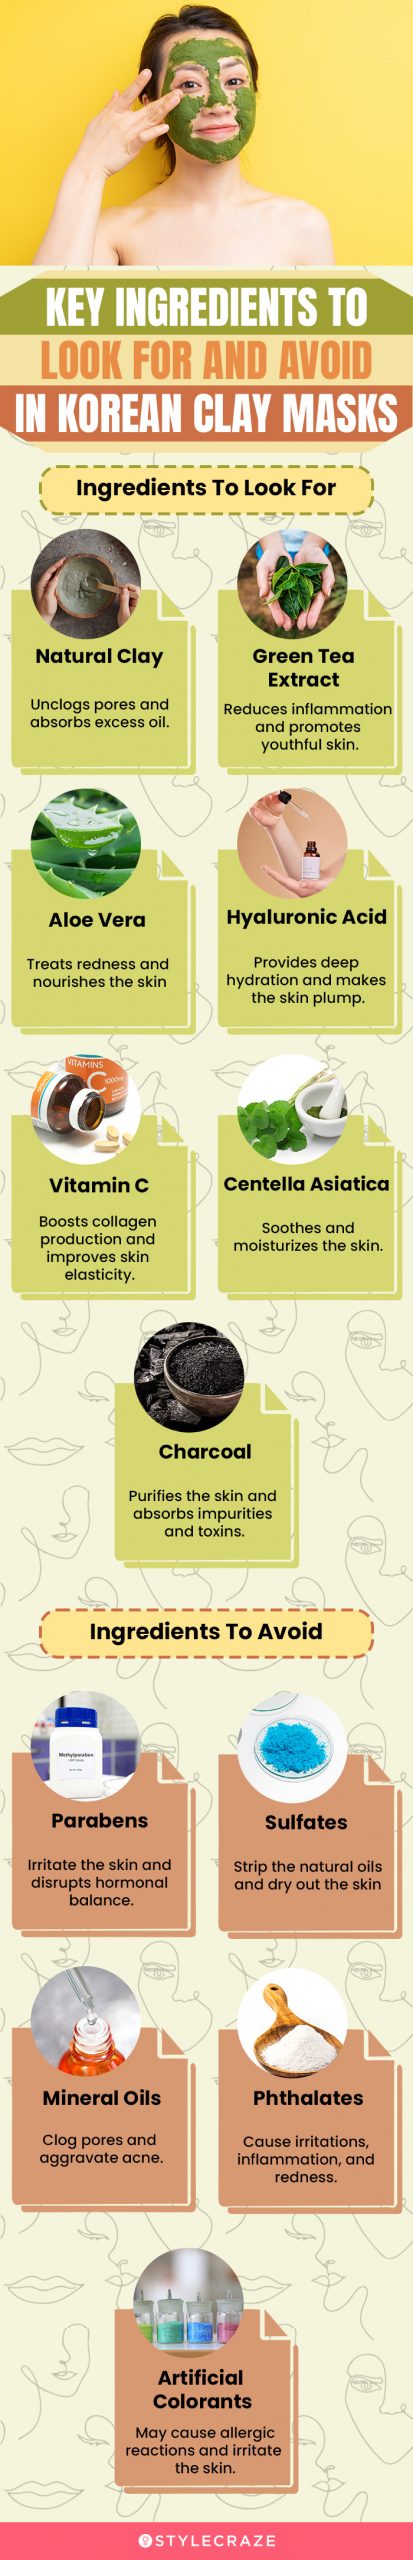 Key Ingredients To Look For And Avoid In Korean Clay Masks(infographic)